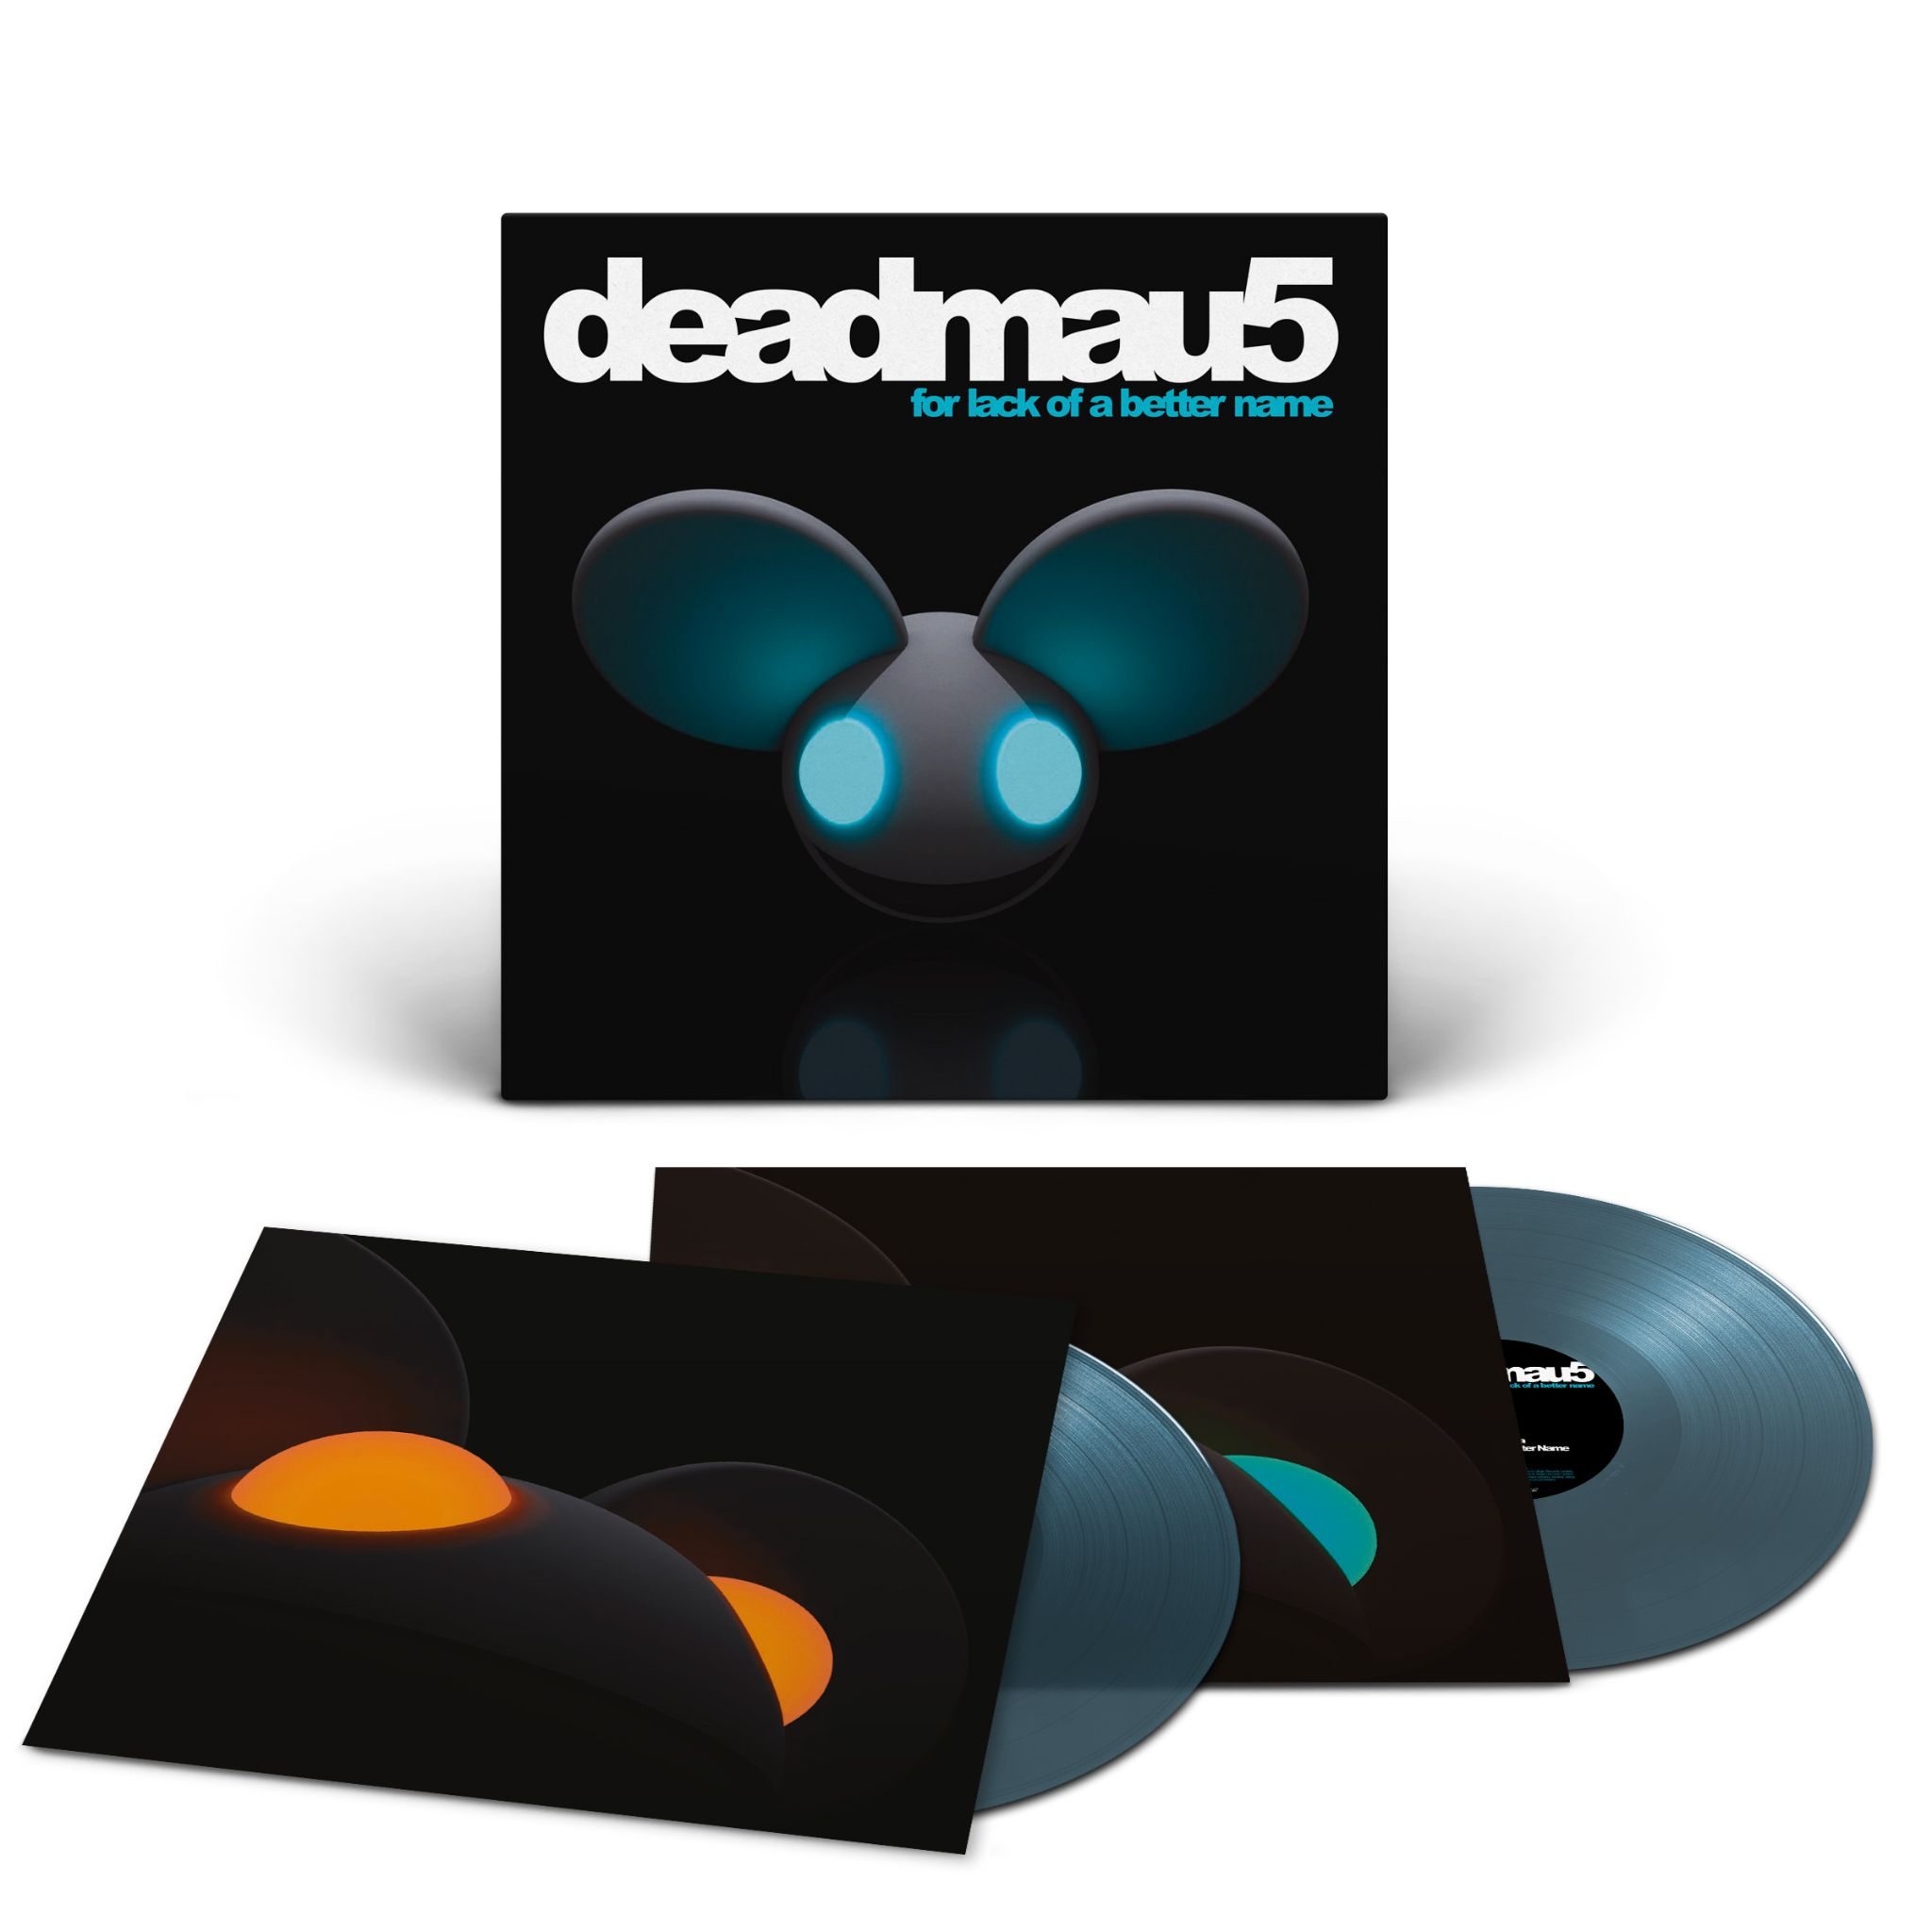 Deadmau5- For Lack Of A Better Name